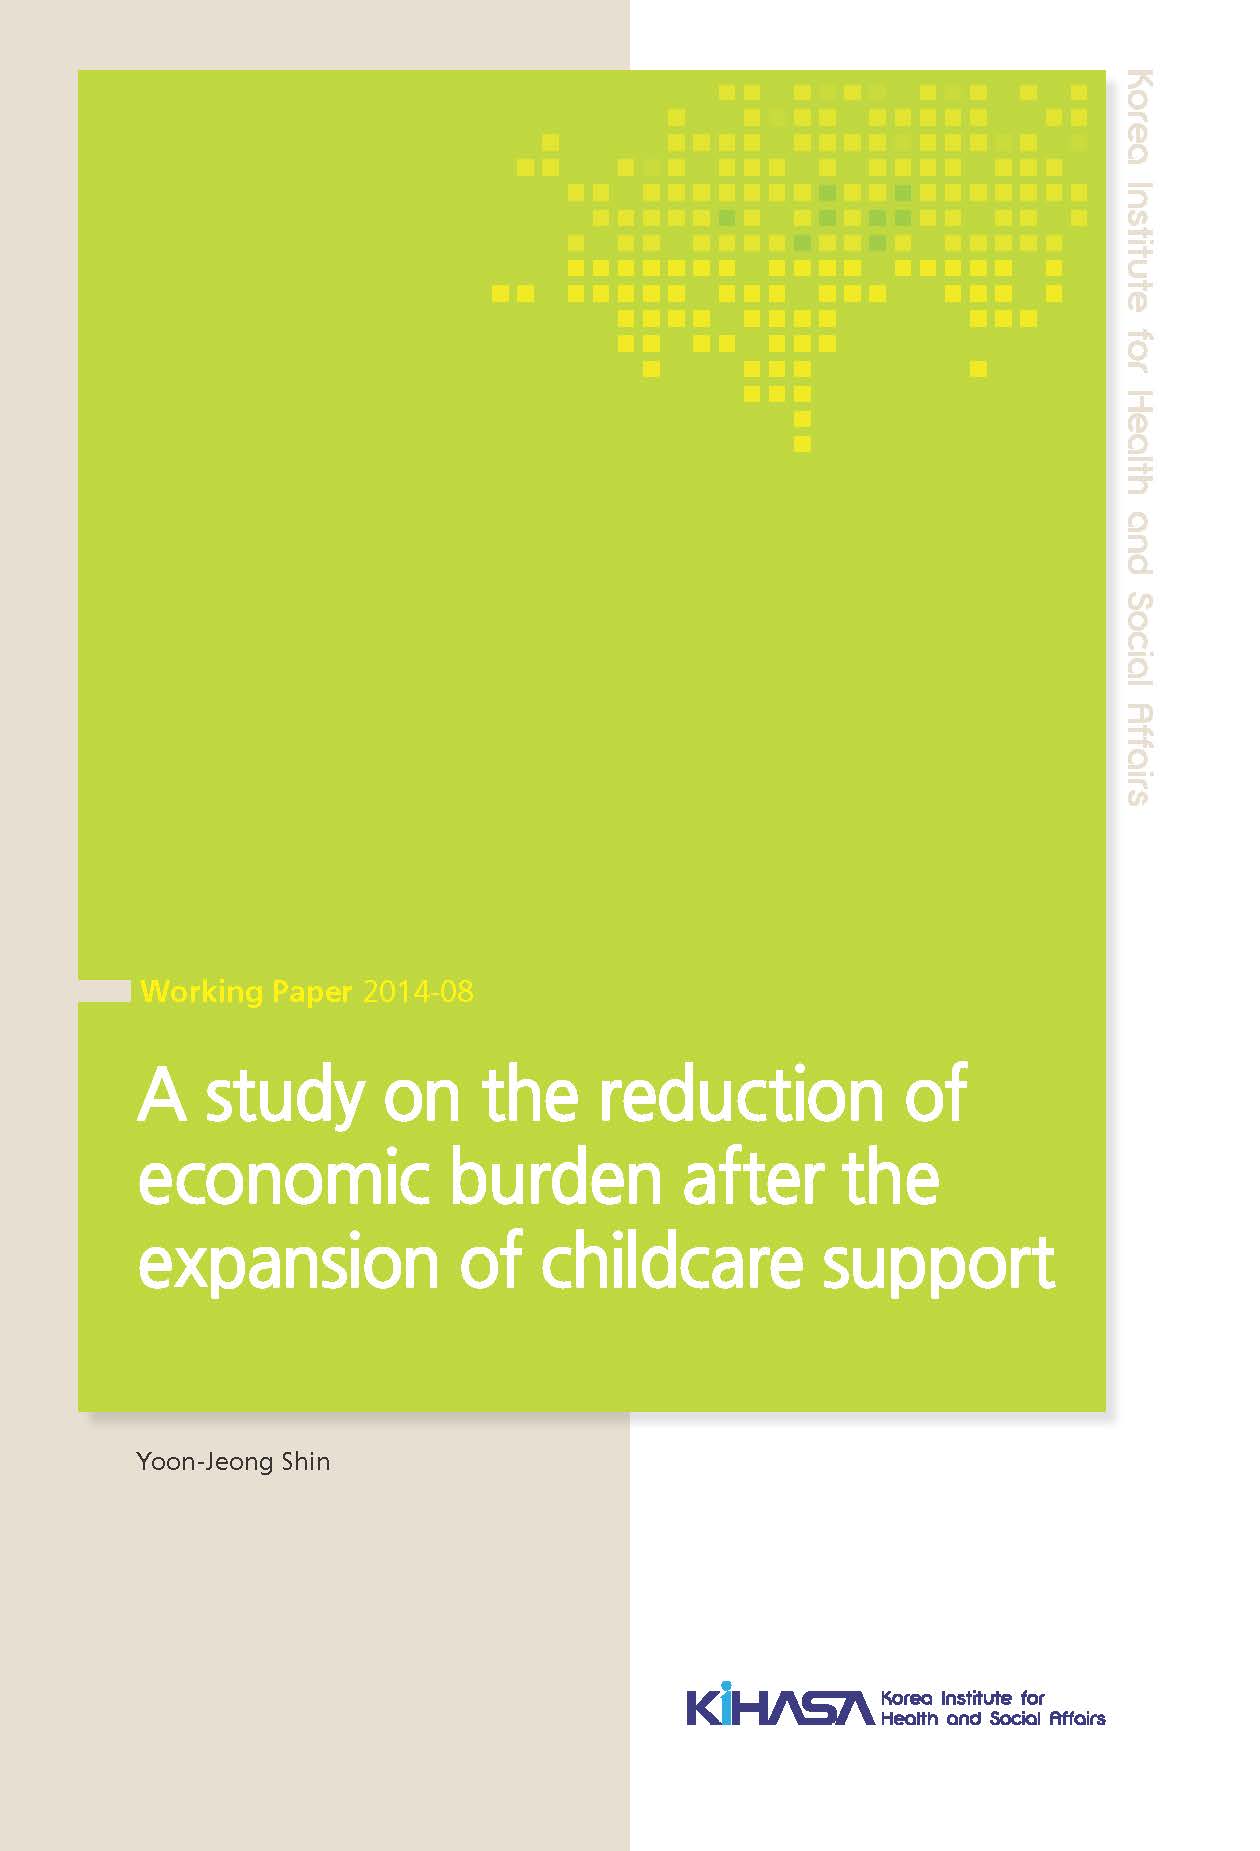 A study on the reduction of economic burden after the expansion of childcare support